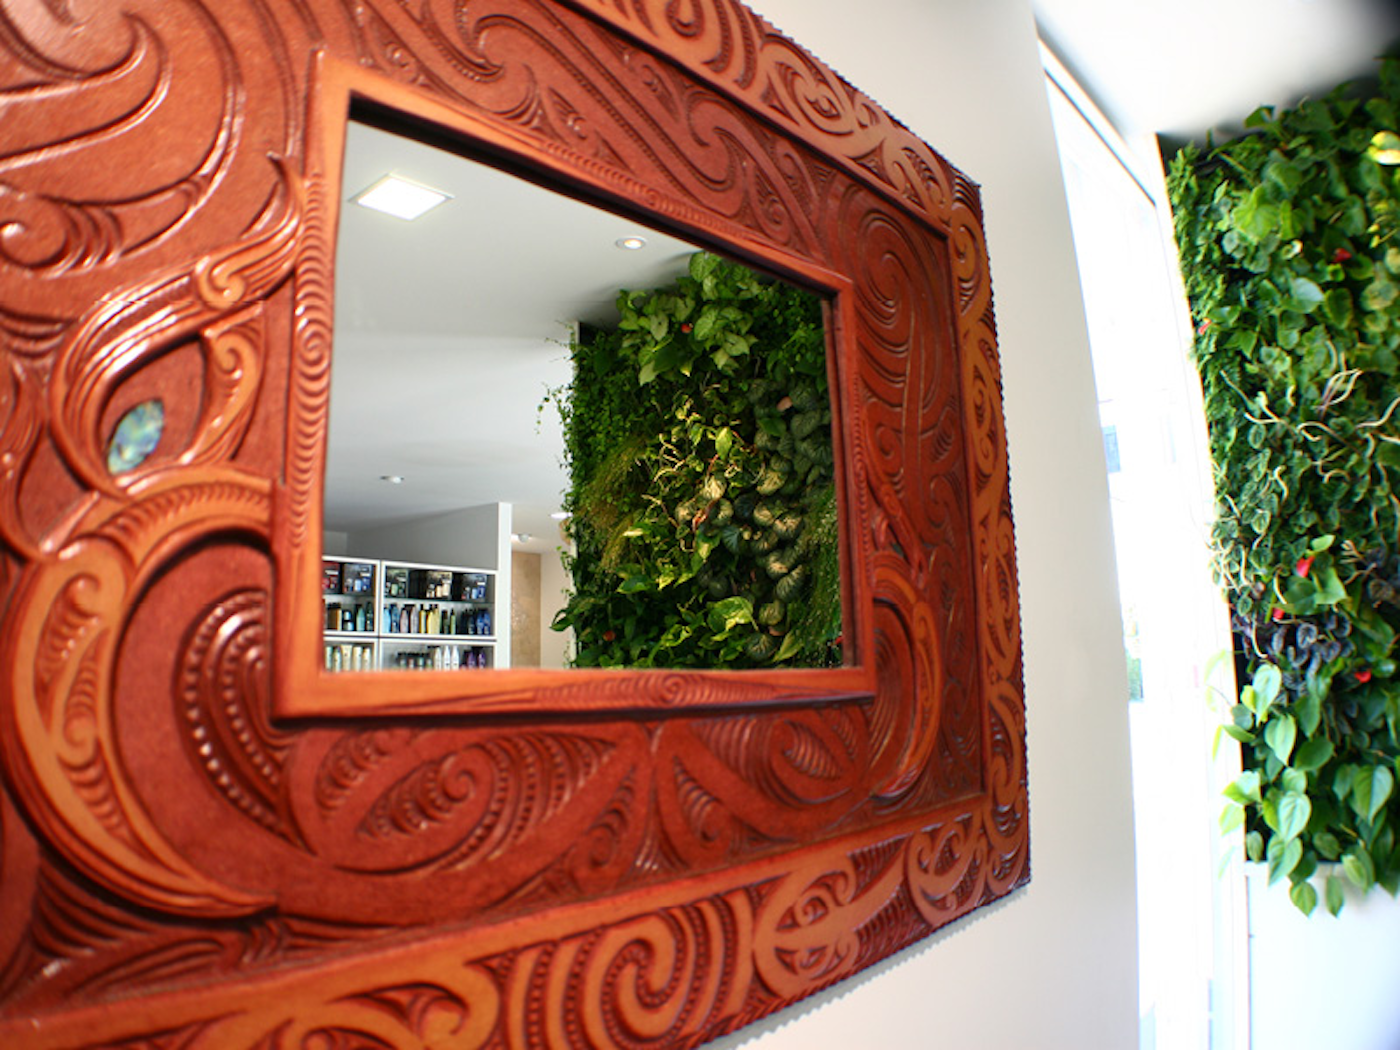 living wall of interior plants in the reflection of an ornate mirror in a hair salon